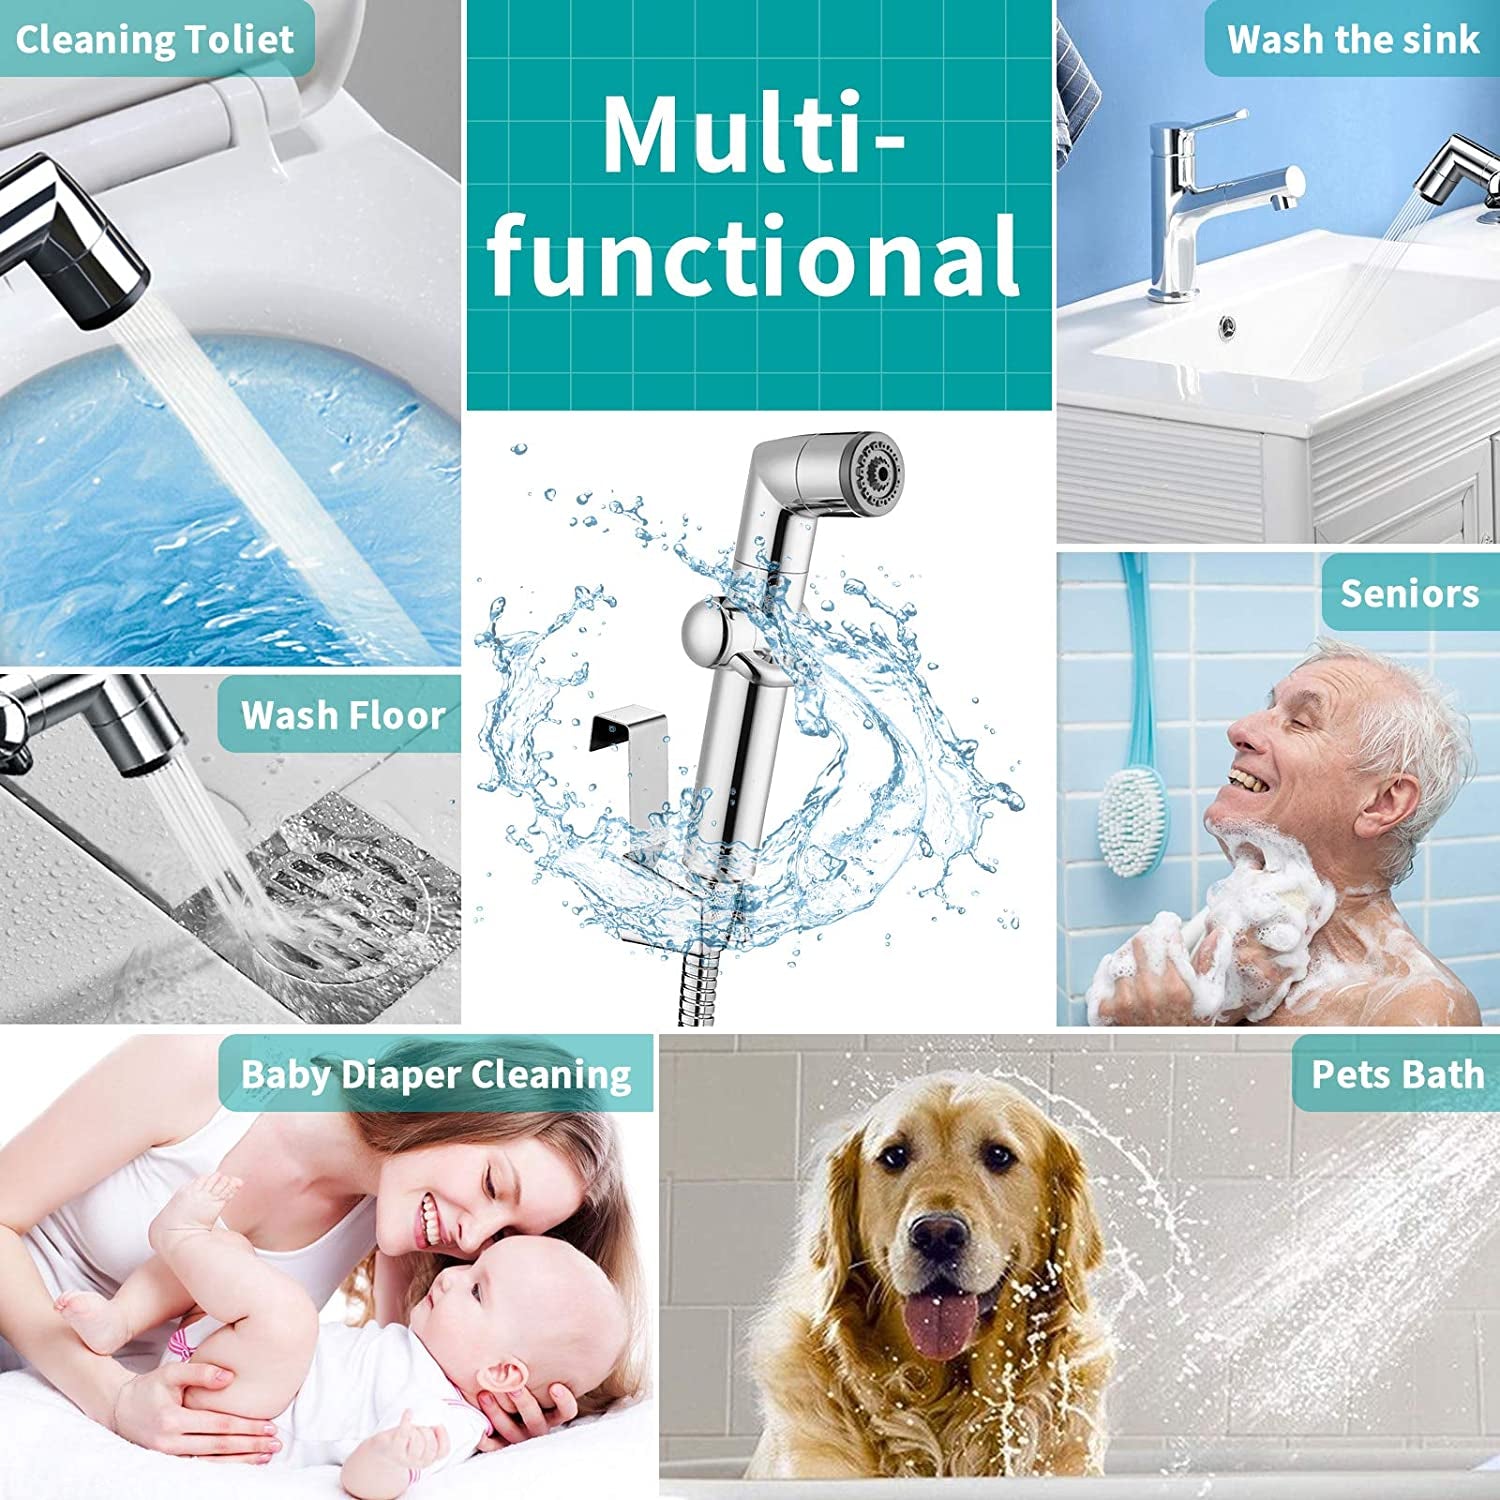 MIAOHUI, MIAOHUI Handheld Bidet Sprayer for Toilet, Muslim Shower, Cloth Diaper Sprayer for Toilet, Toilet Sprayer Attachment, Health Faucet, Bum Gun with Hose and Holder, Wall or Toilet Mount (Chrome)